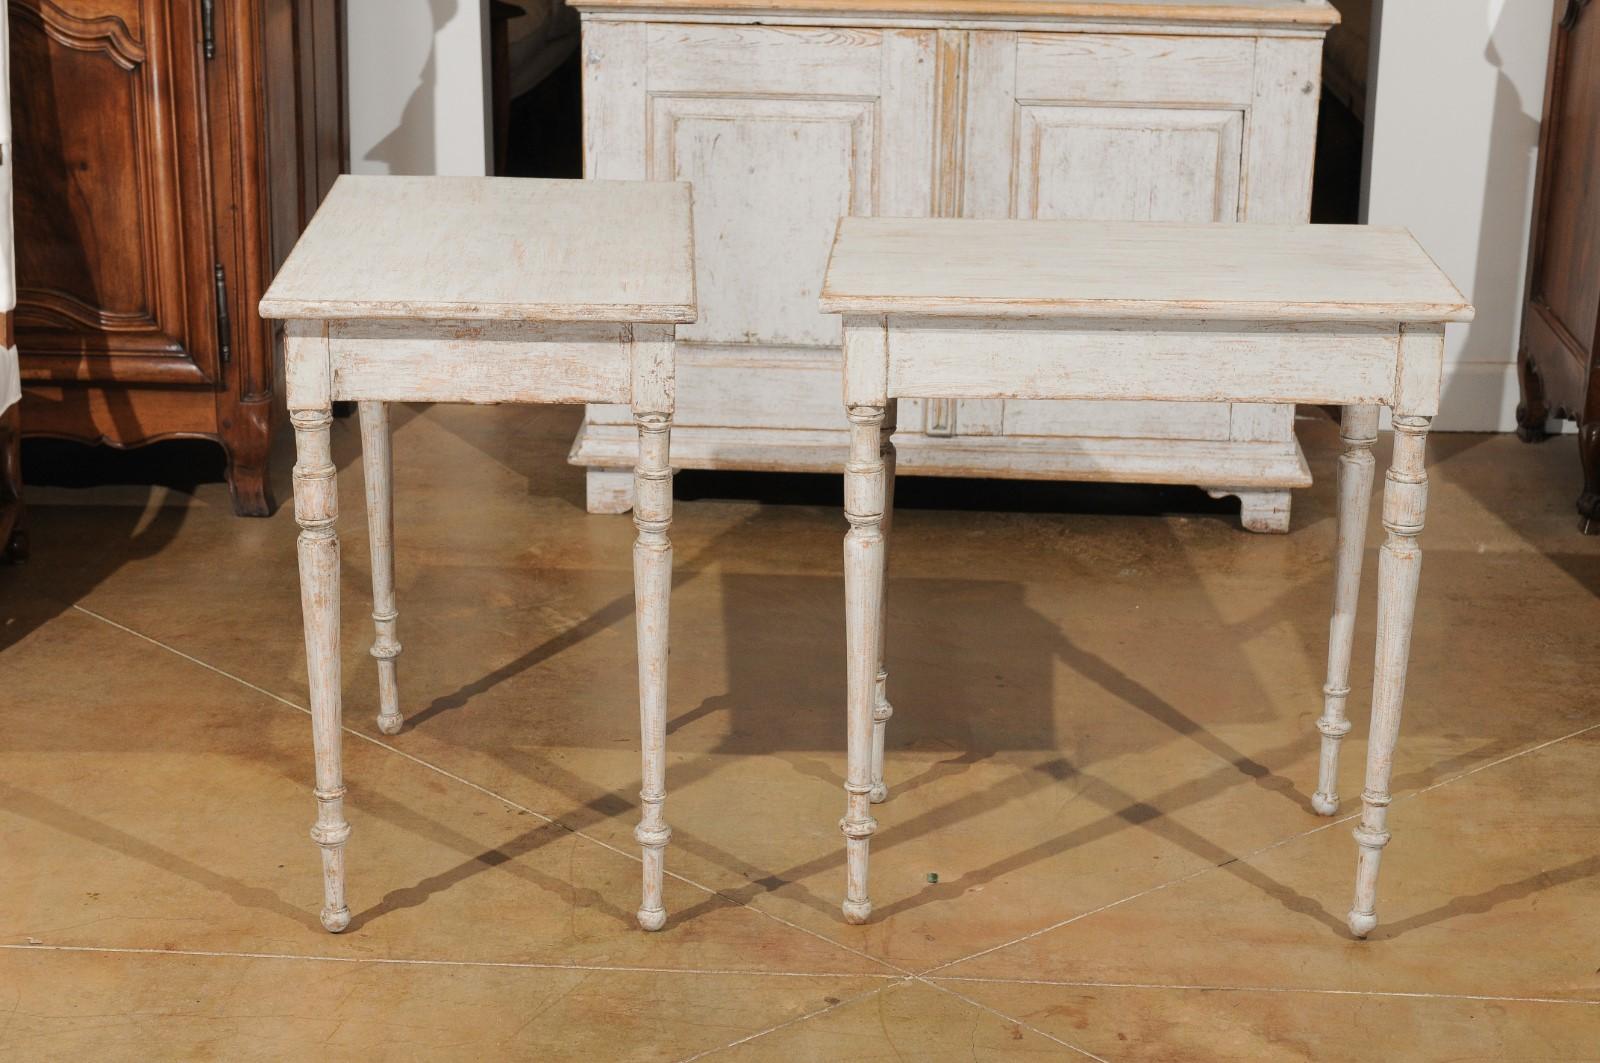 Pair of Swedish 19th Century Tables with Turned Legs and Distressed Finish 5